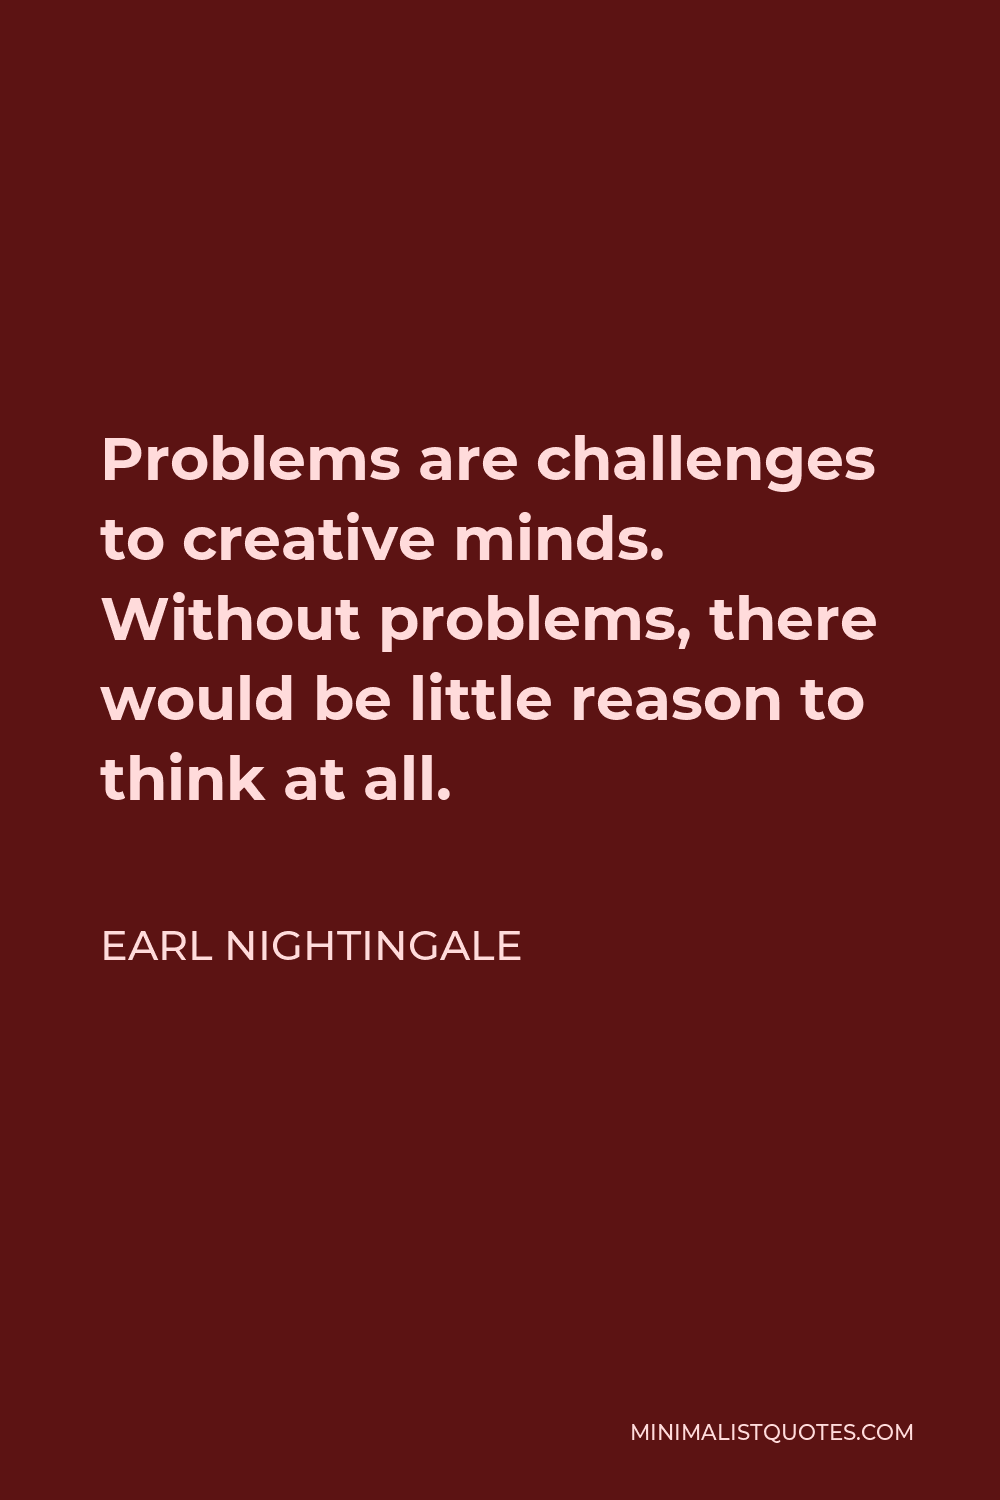 Earl Nightingale Quote - Problems are challenges to creative minds. Without problems, there would be little reason to think at all.